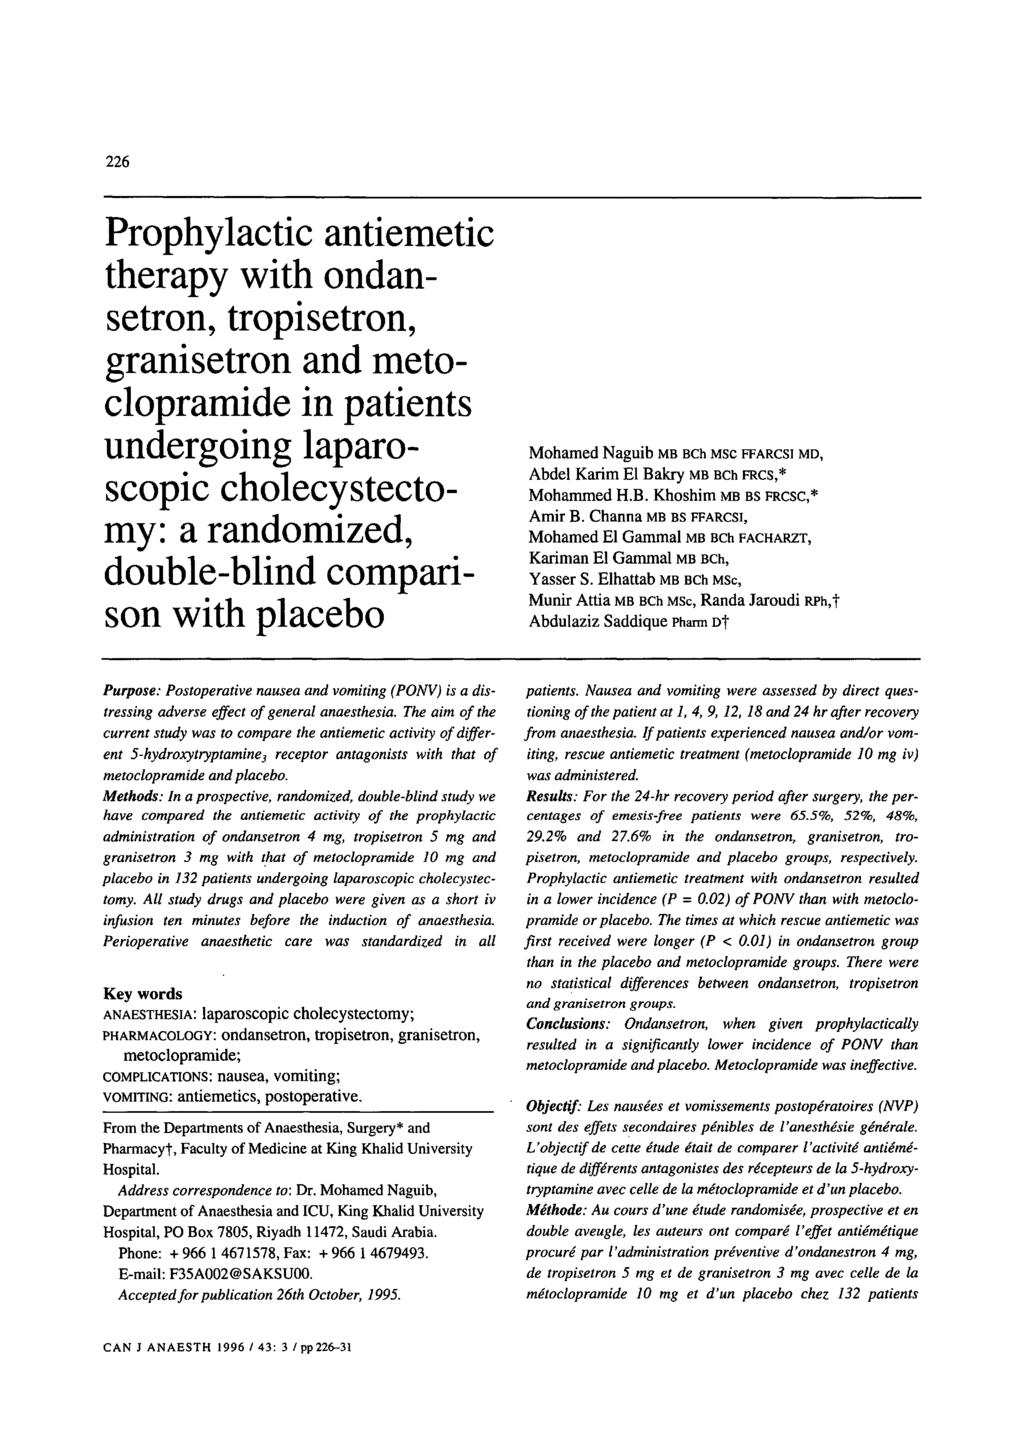 226 Prophylactic antiemetic therapy with ondansetron, tropisetron, granisetron and metoclopramlde in patients undergoing laparoscopic cholecystectomy: a randomized, double-blind comparison with